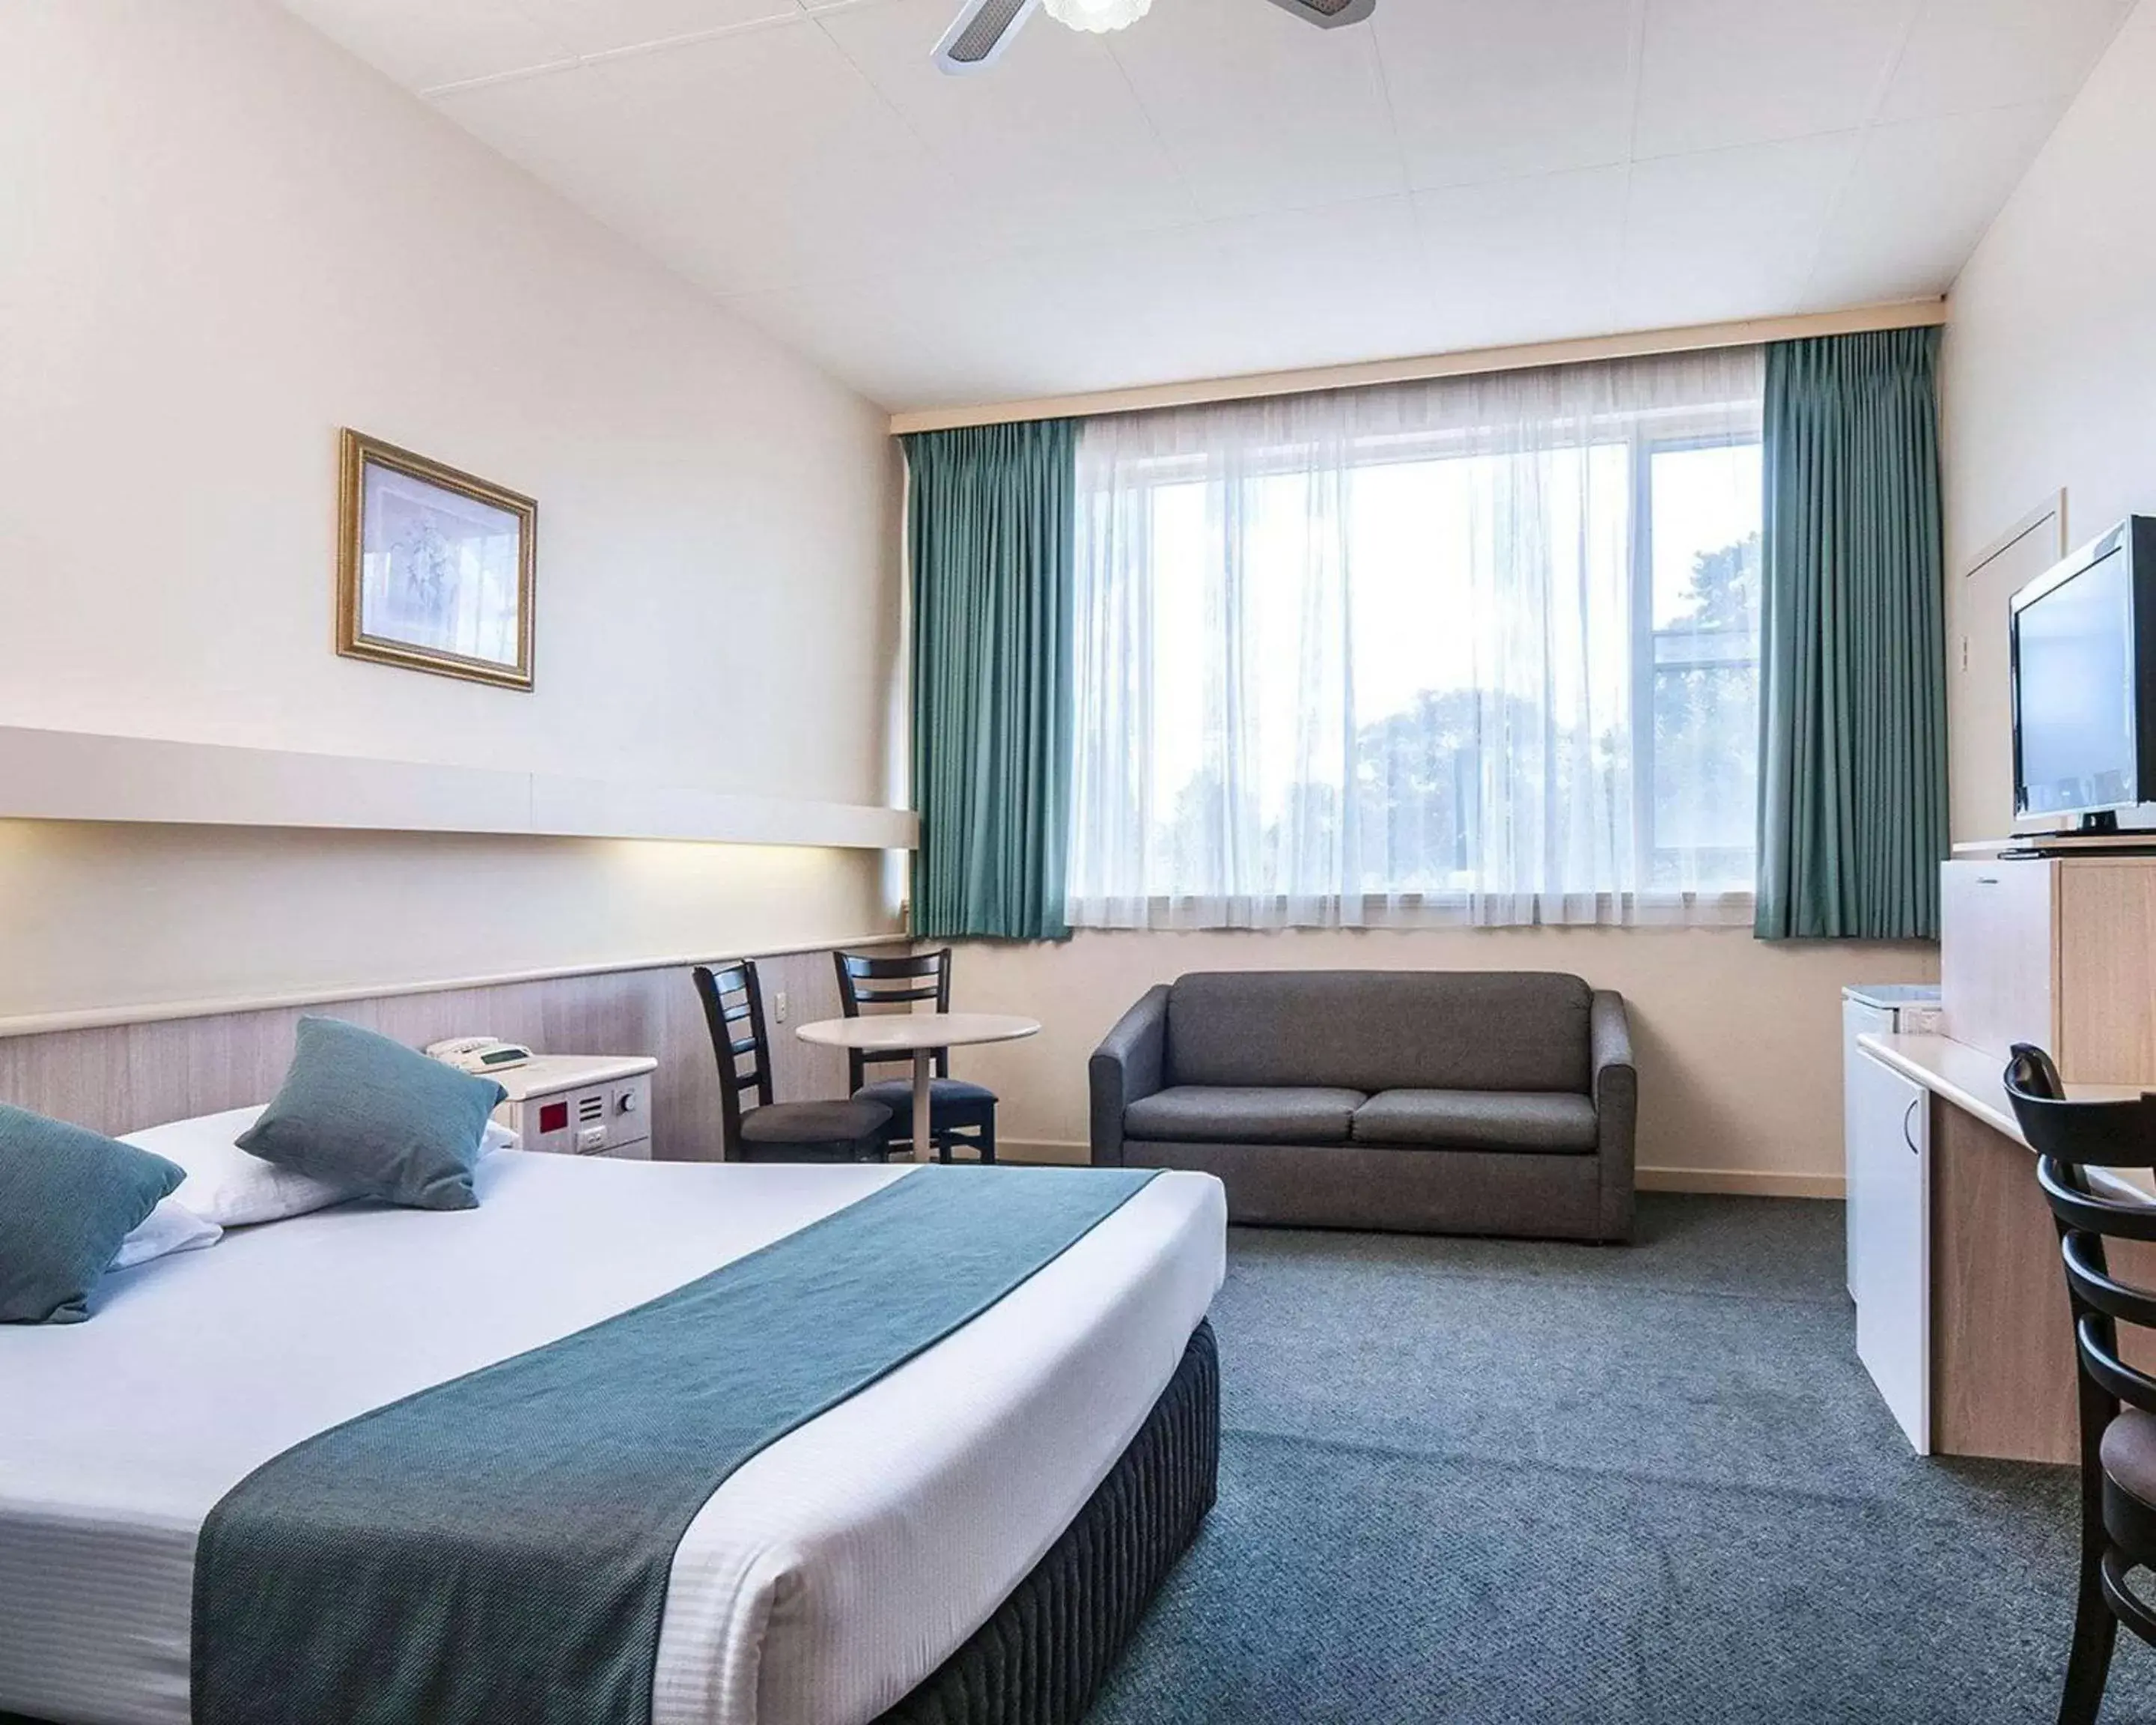 Photo of the whole room in Comfort Inn Regal Park, North Adelaide